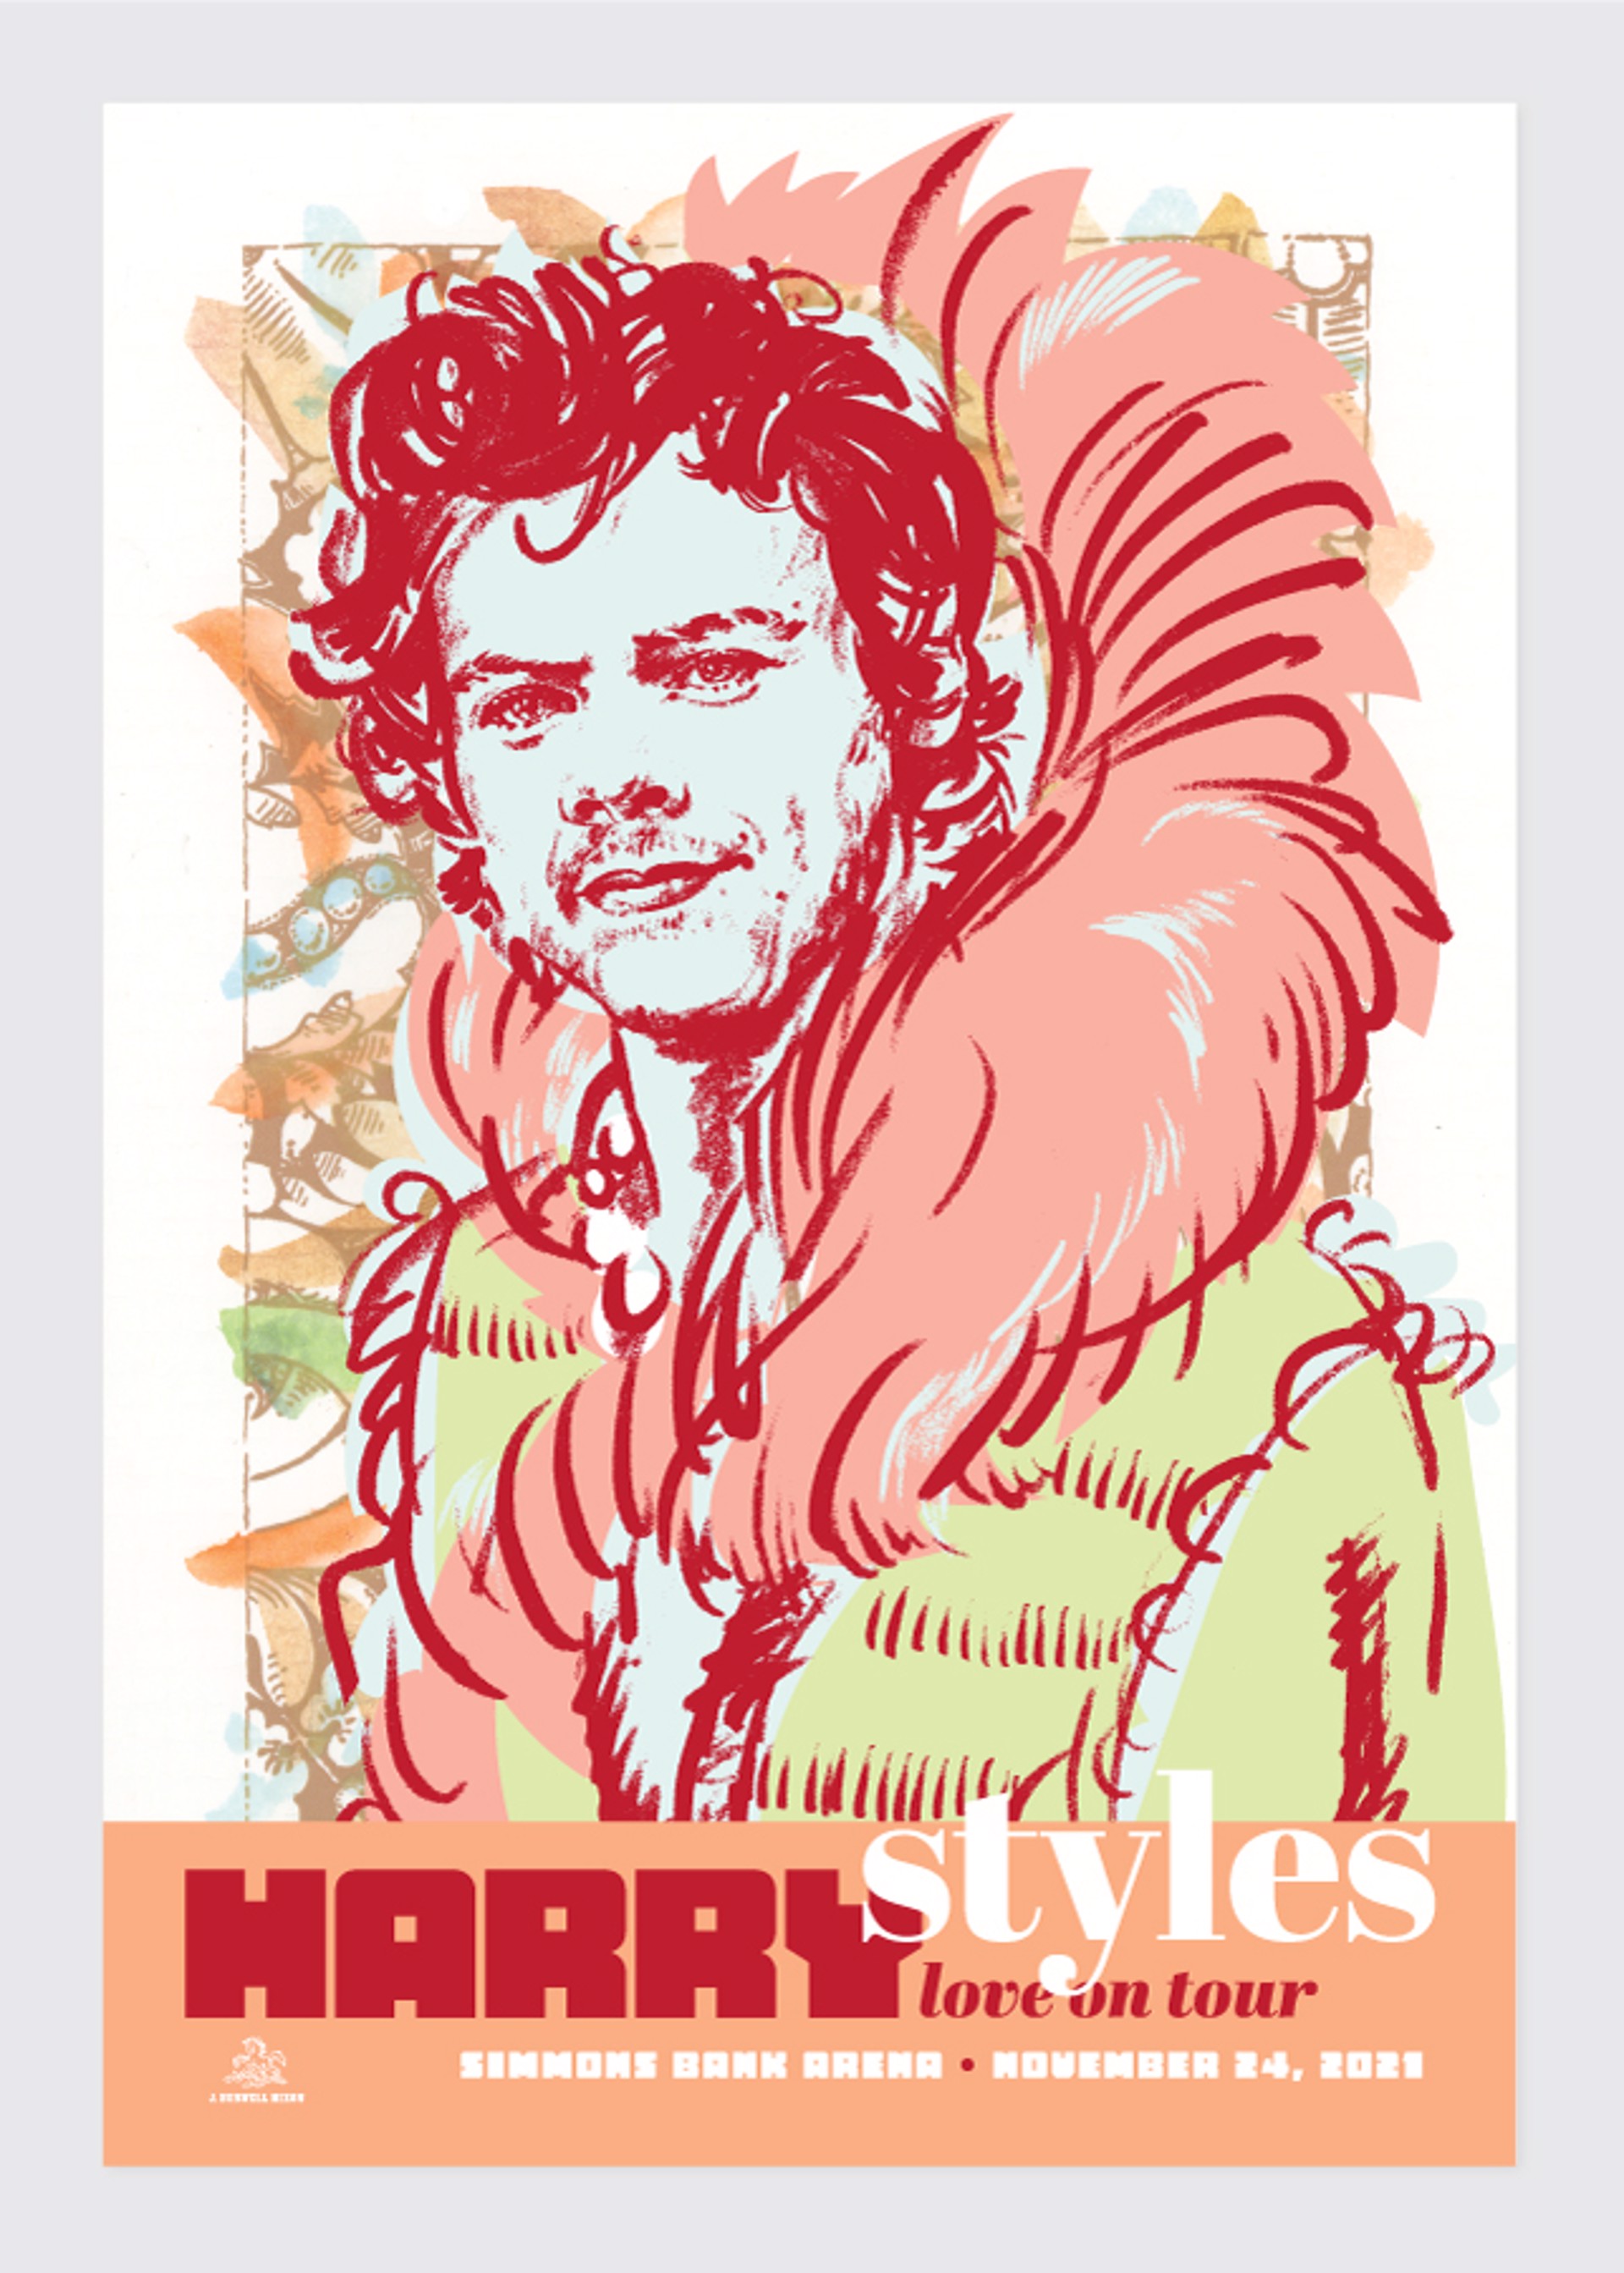 Harry Styles Concert Poster by Jamie Burwell Mixon